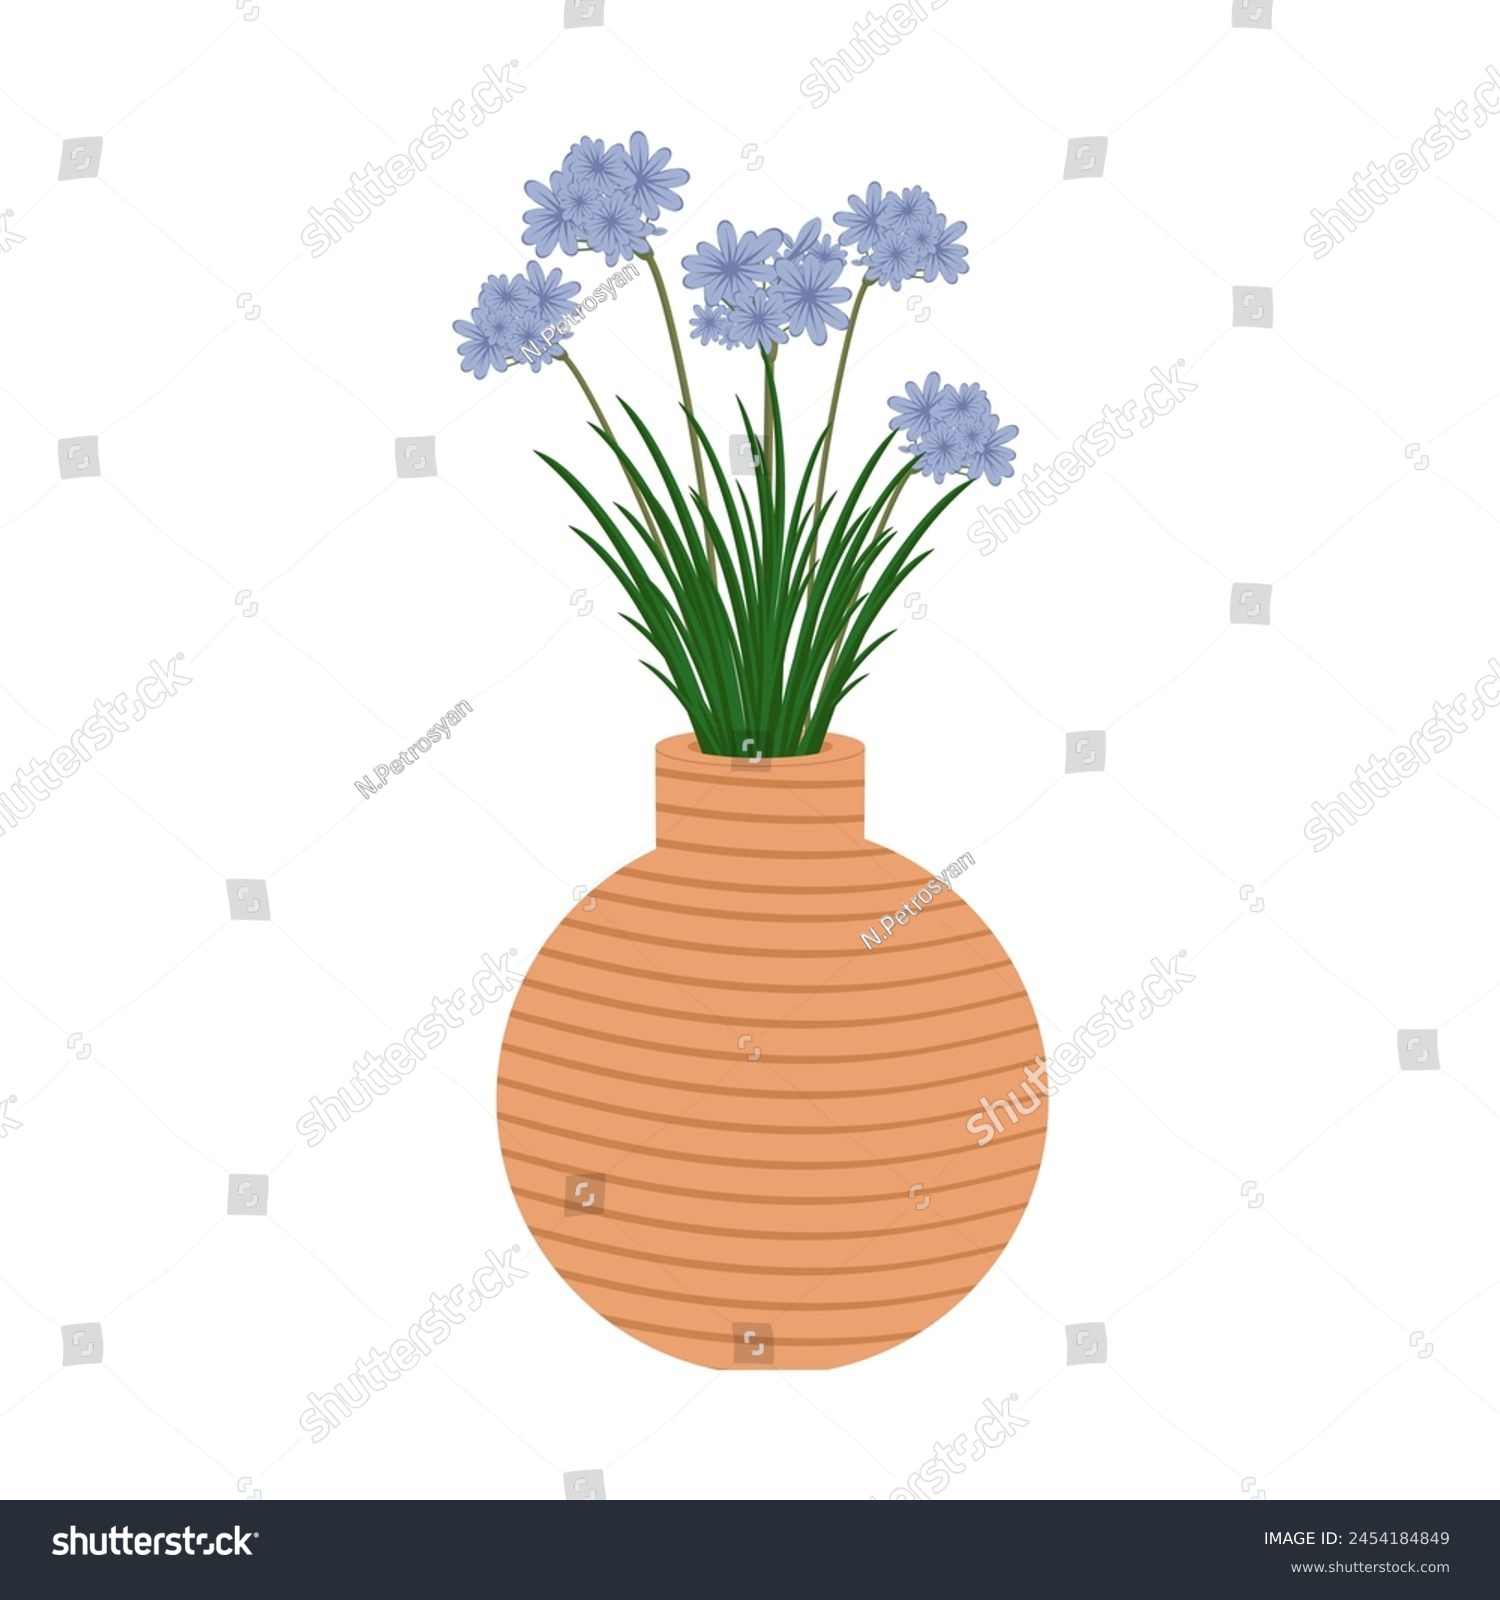 SVG of Beautiful bouquet with agapanthus flowers and branches in ceramic vase. Flat illustration of blooming flowers with leaves and stem isolated on white background. Blossom African Lily. Vector svg